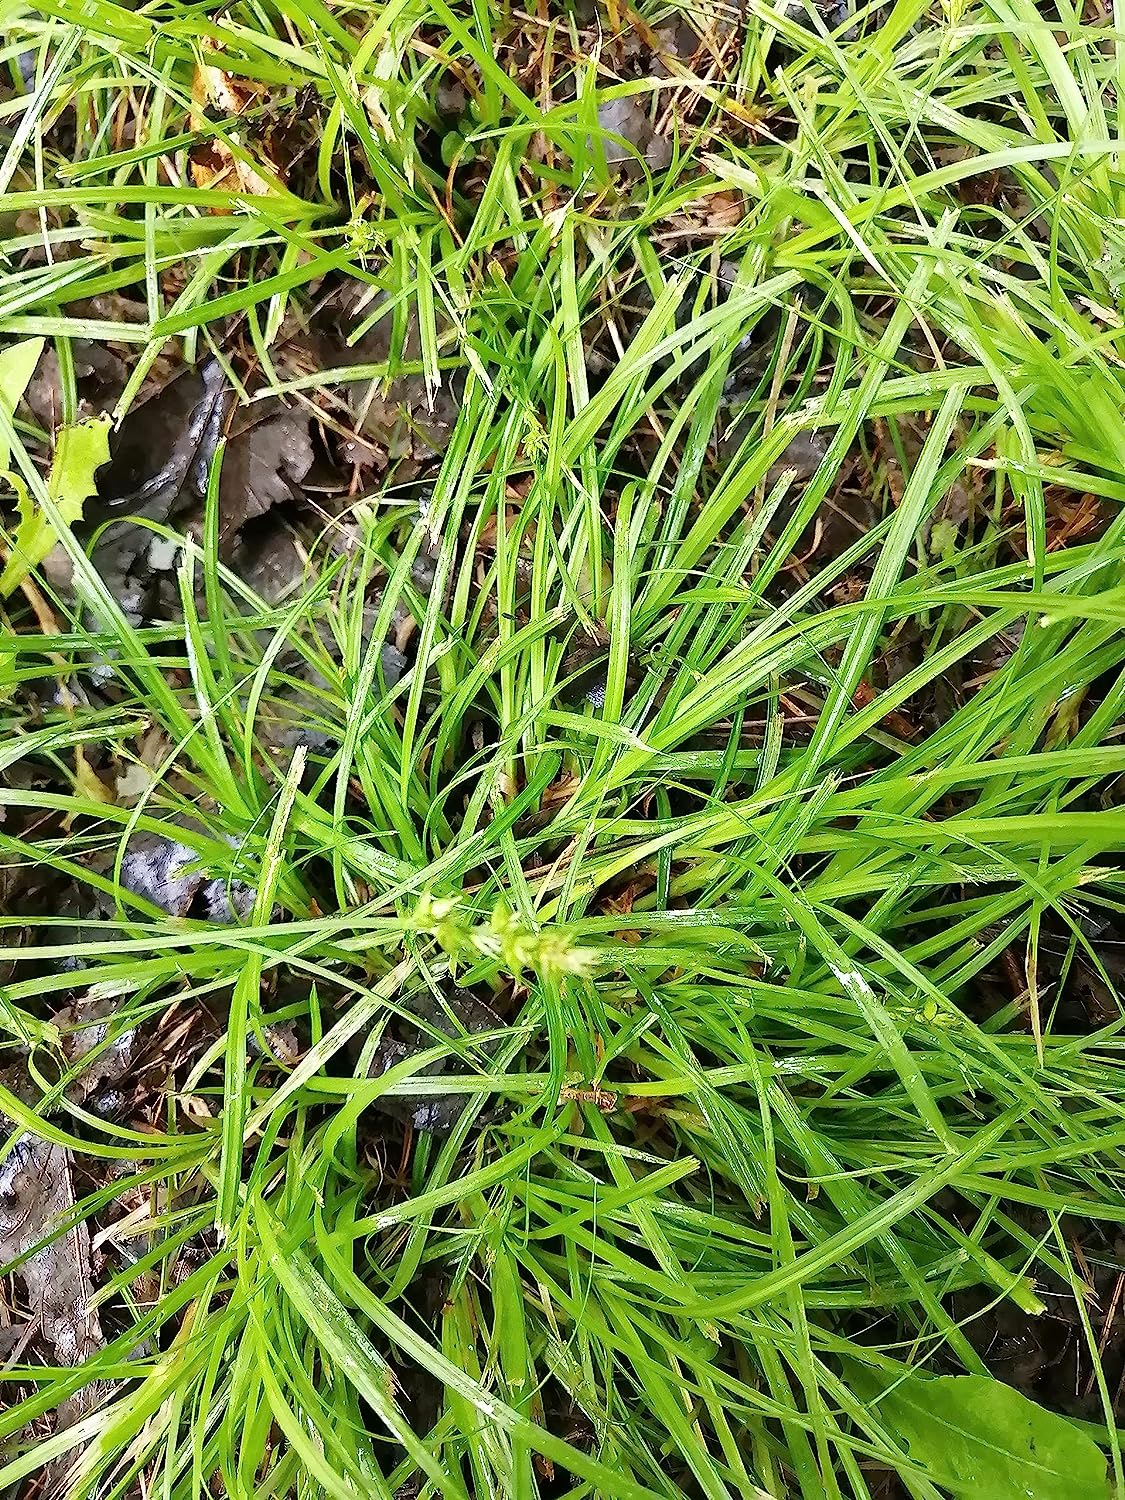 Hundredfold Leavenworth's Sedge Live Plants in a Small Container - Carex leavenworthii Lawn Sedge Ontario Native Grass, Lawn Alternative and Ground Cover for Shade Areas, Indoor House Plant